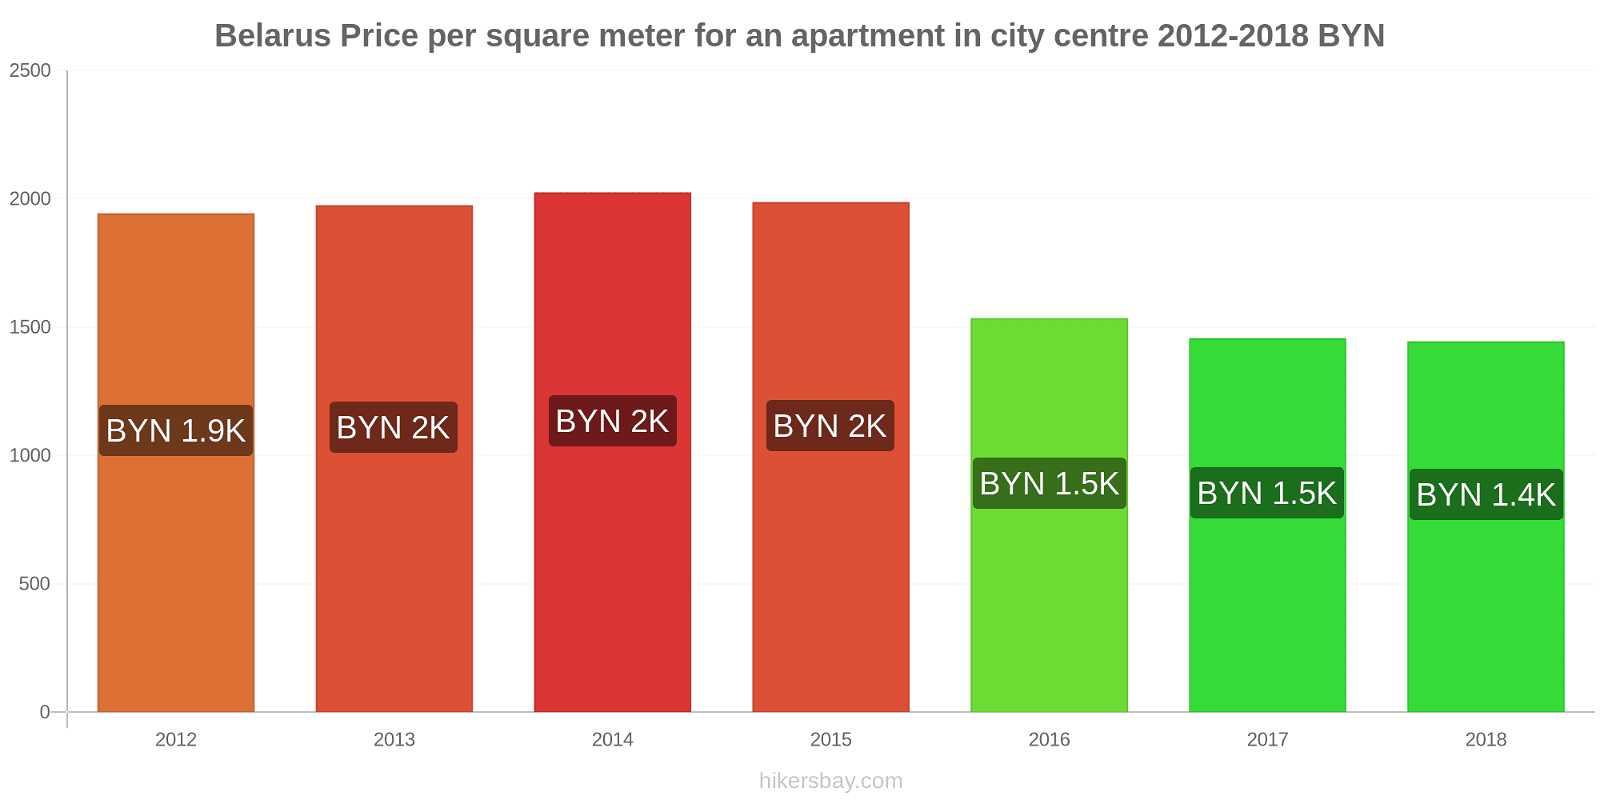 Belarus price changes Price per square meter for an apartment in the city center hikersbay.com